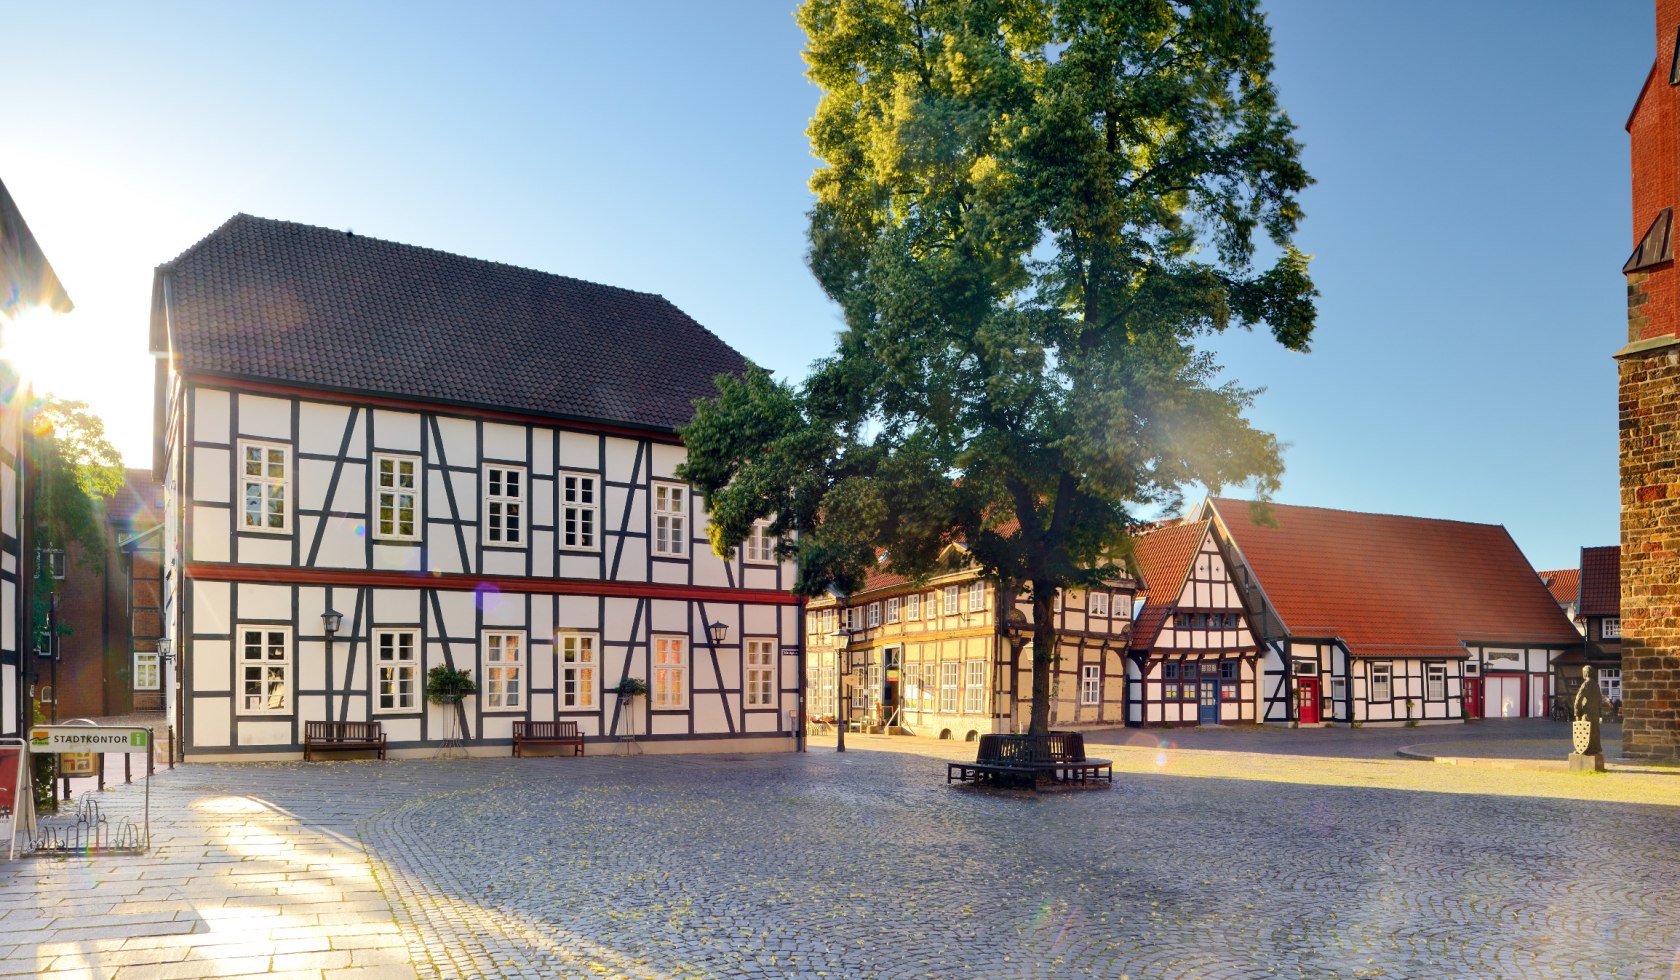 Market place in Nienburg with half-timbered houses, © DZT/Carovillano